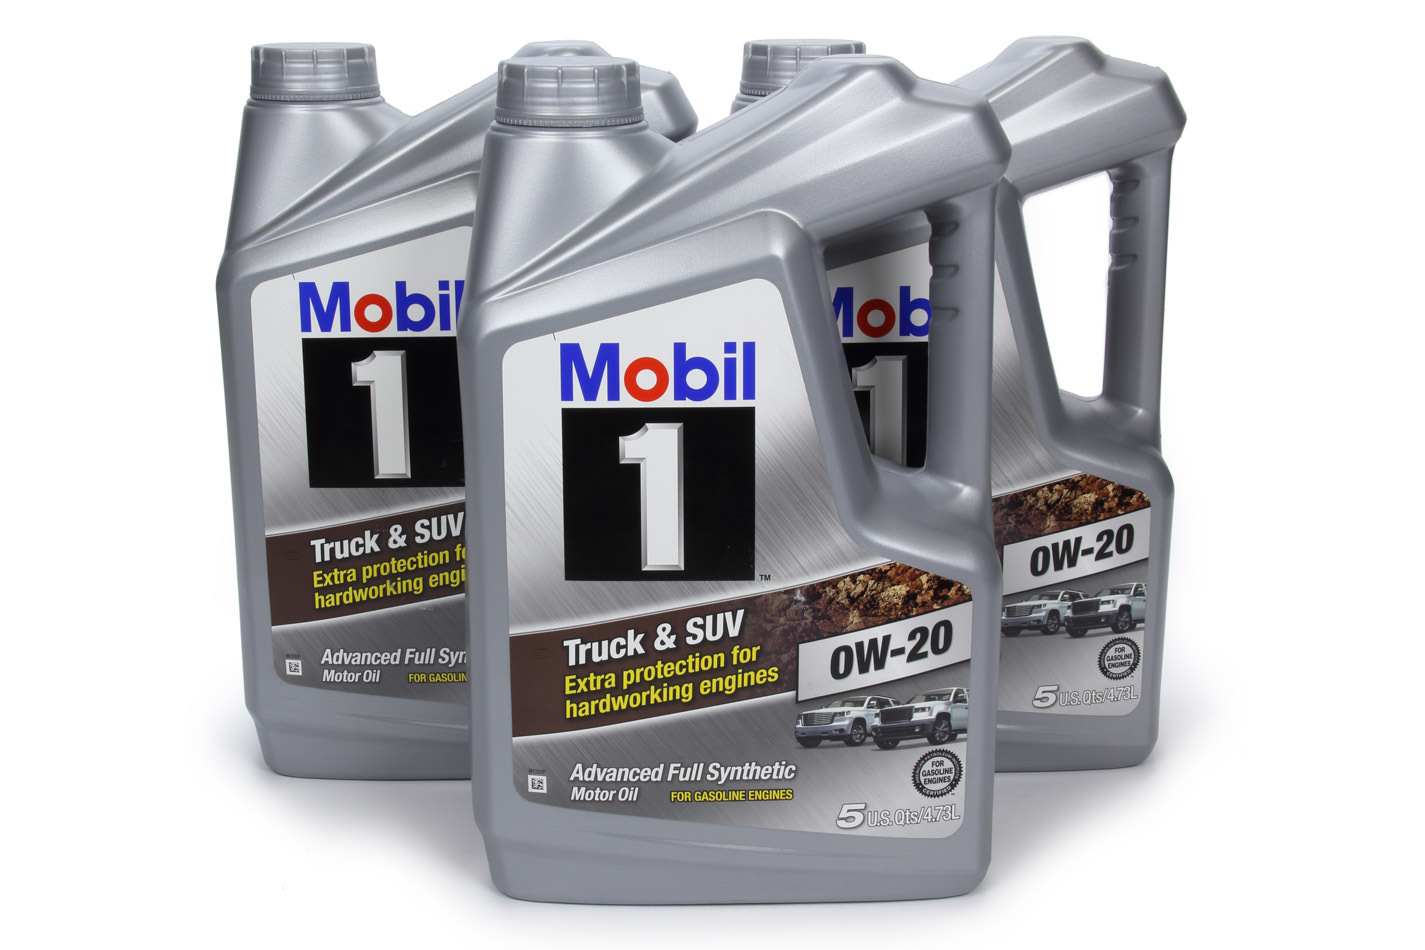 MOBIL 1 Motor Oil Truck and SUV 0W20 Synthetic 5 qt Jug Set of 3